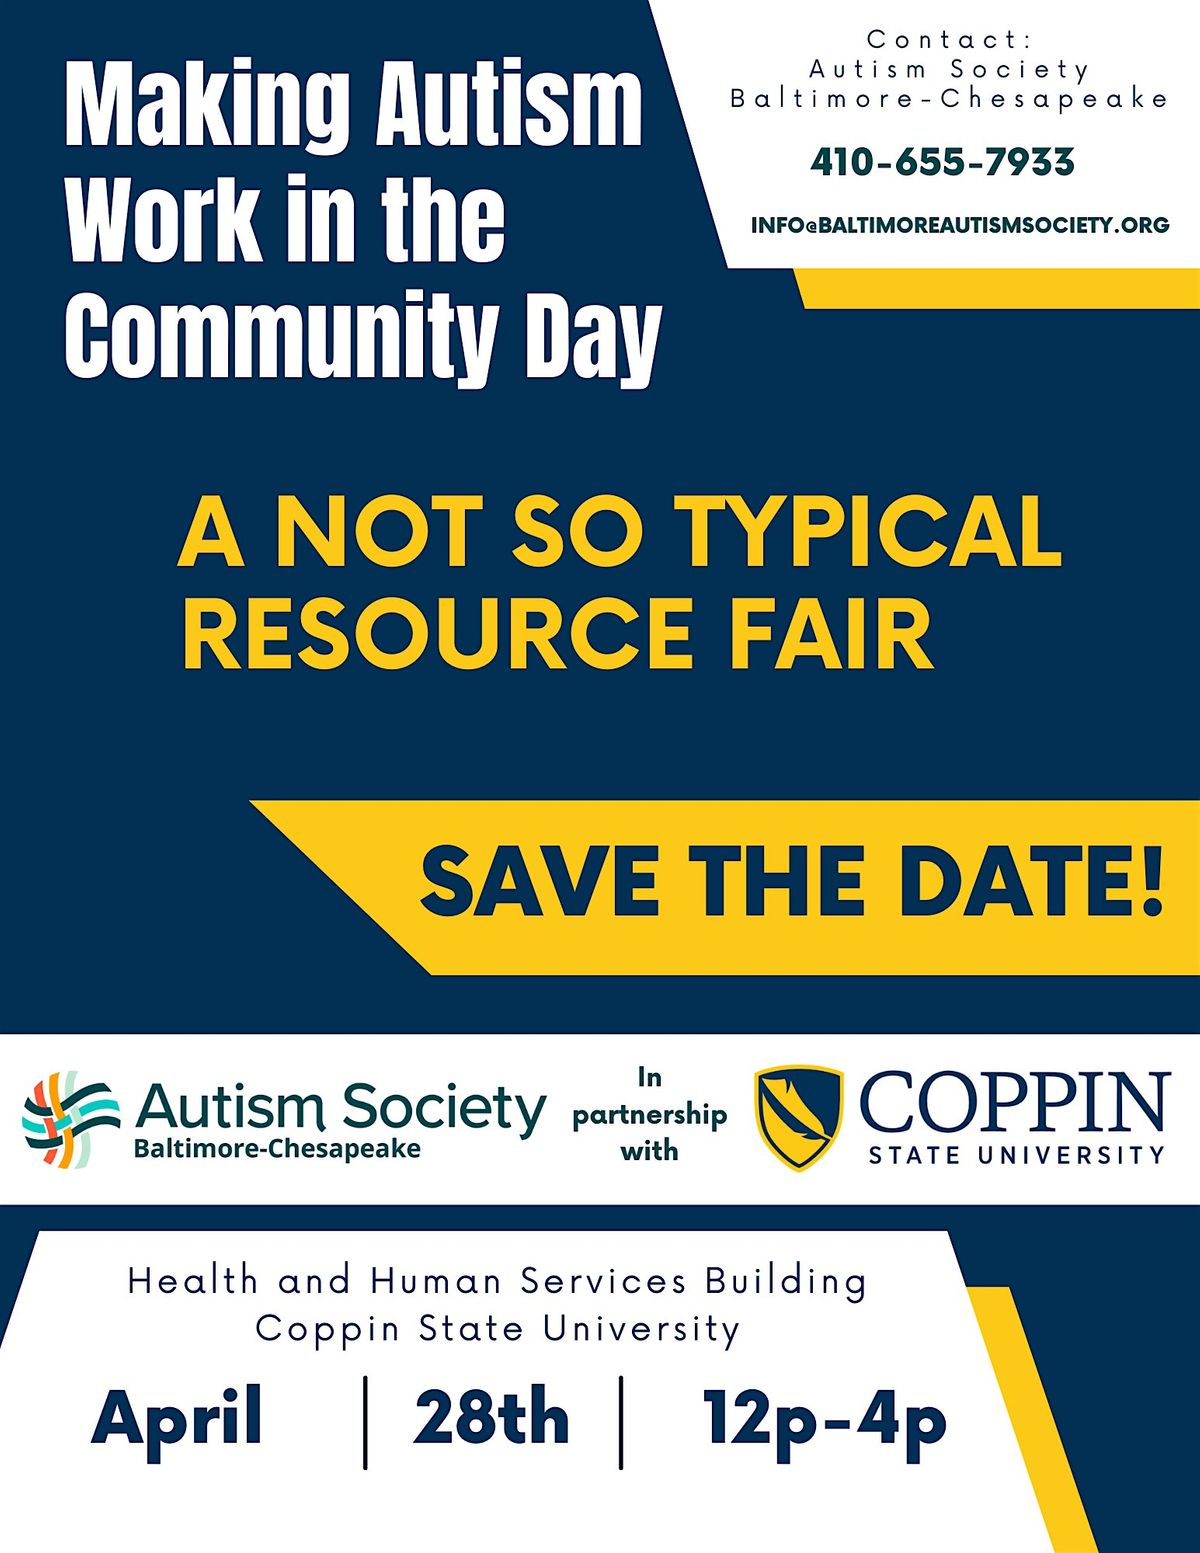 Making Autism Work in the Community Day at Coppin State (Free Event)